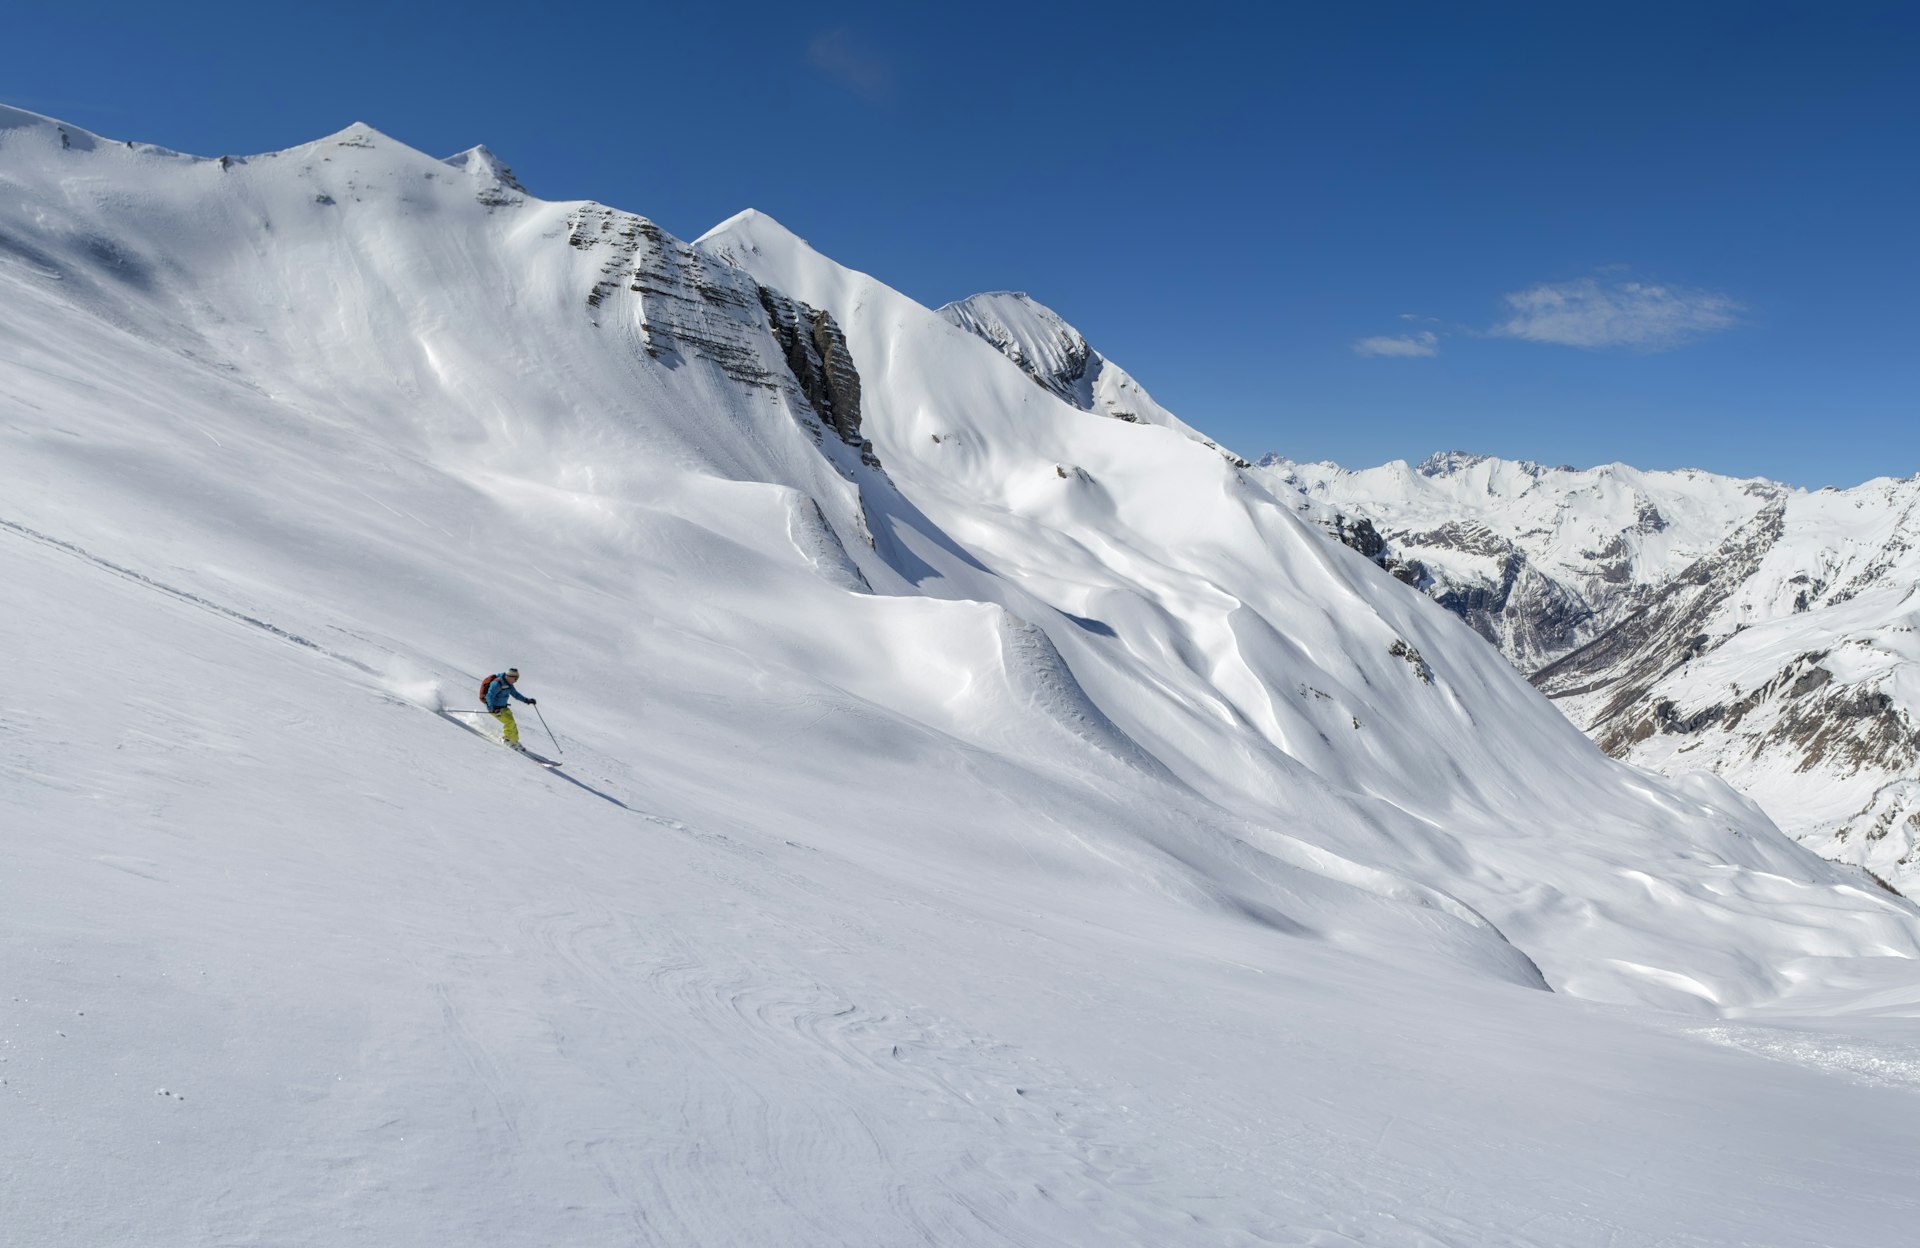 A skier speeds down a snowy slope in the Hautes Alpes of Ecrins National Park in France